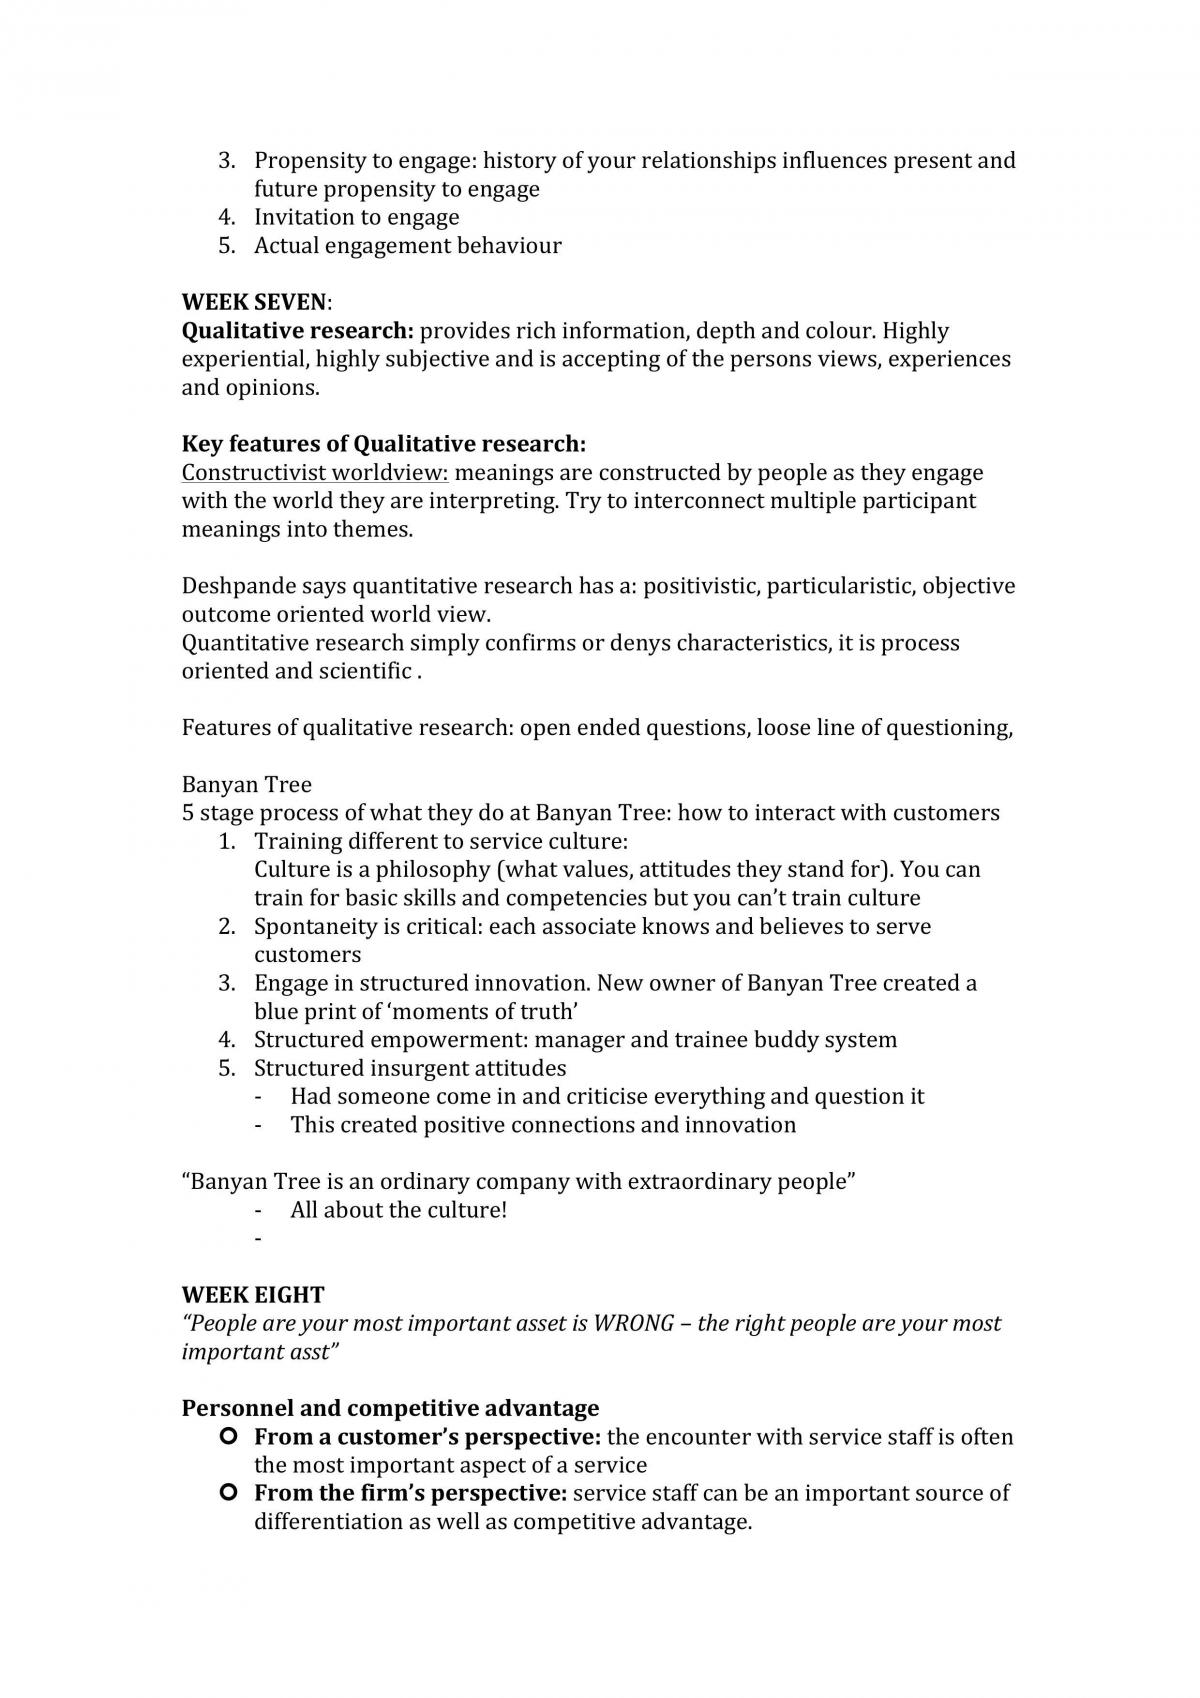 Services Marketing Complete Notes - Page 19